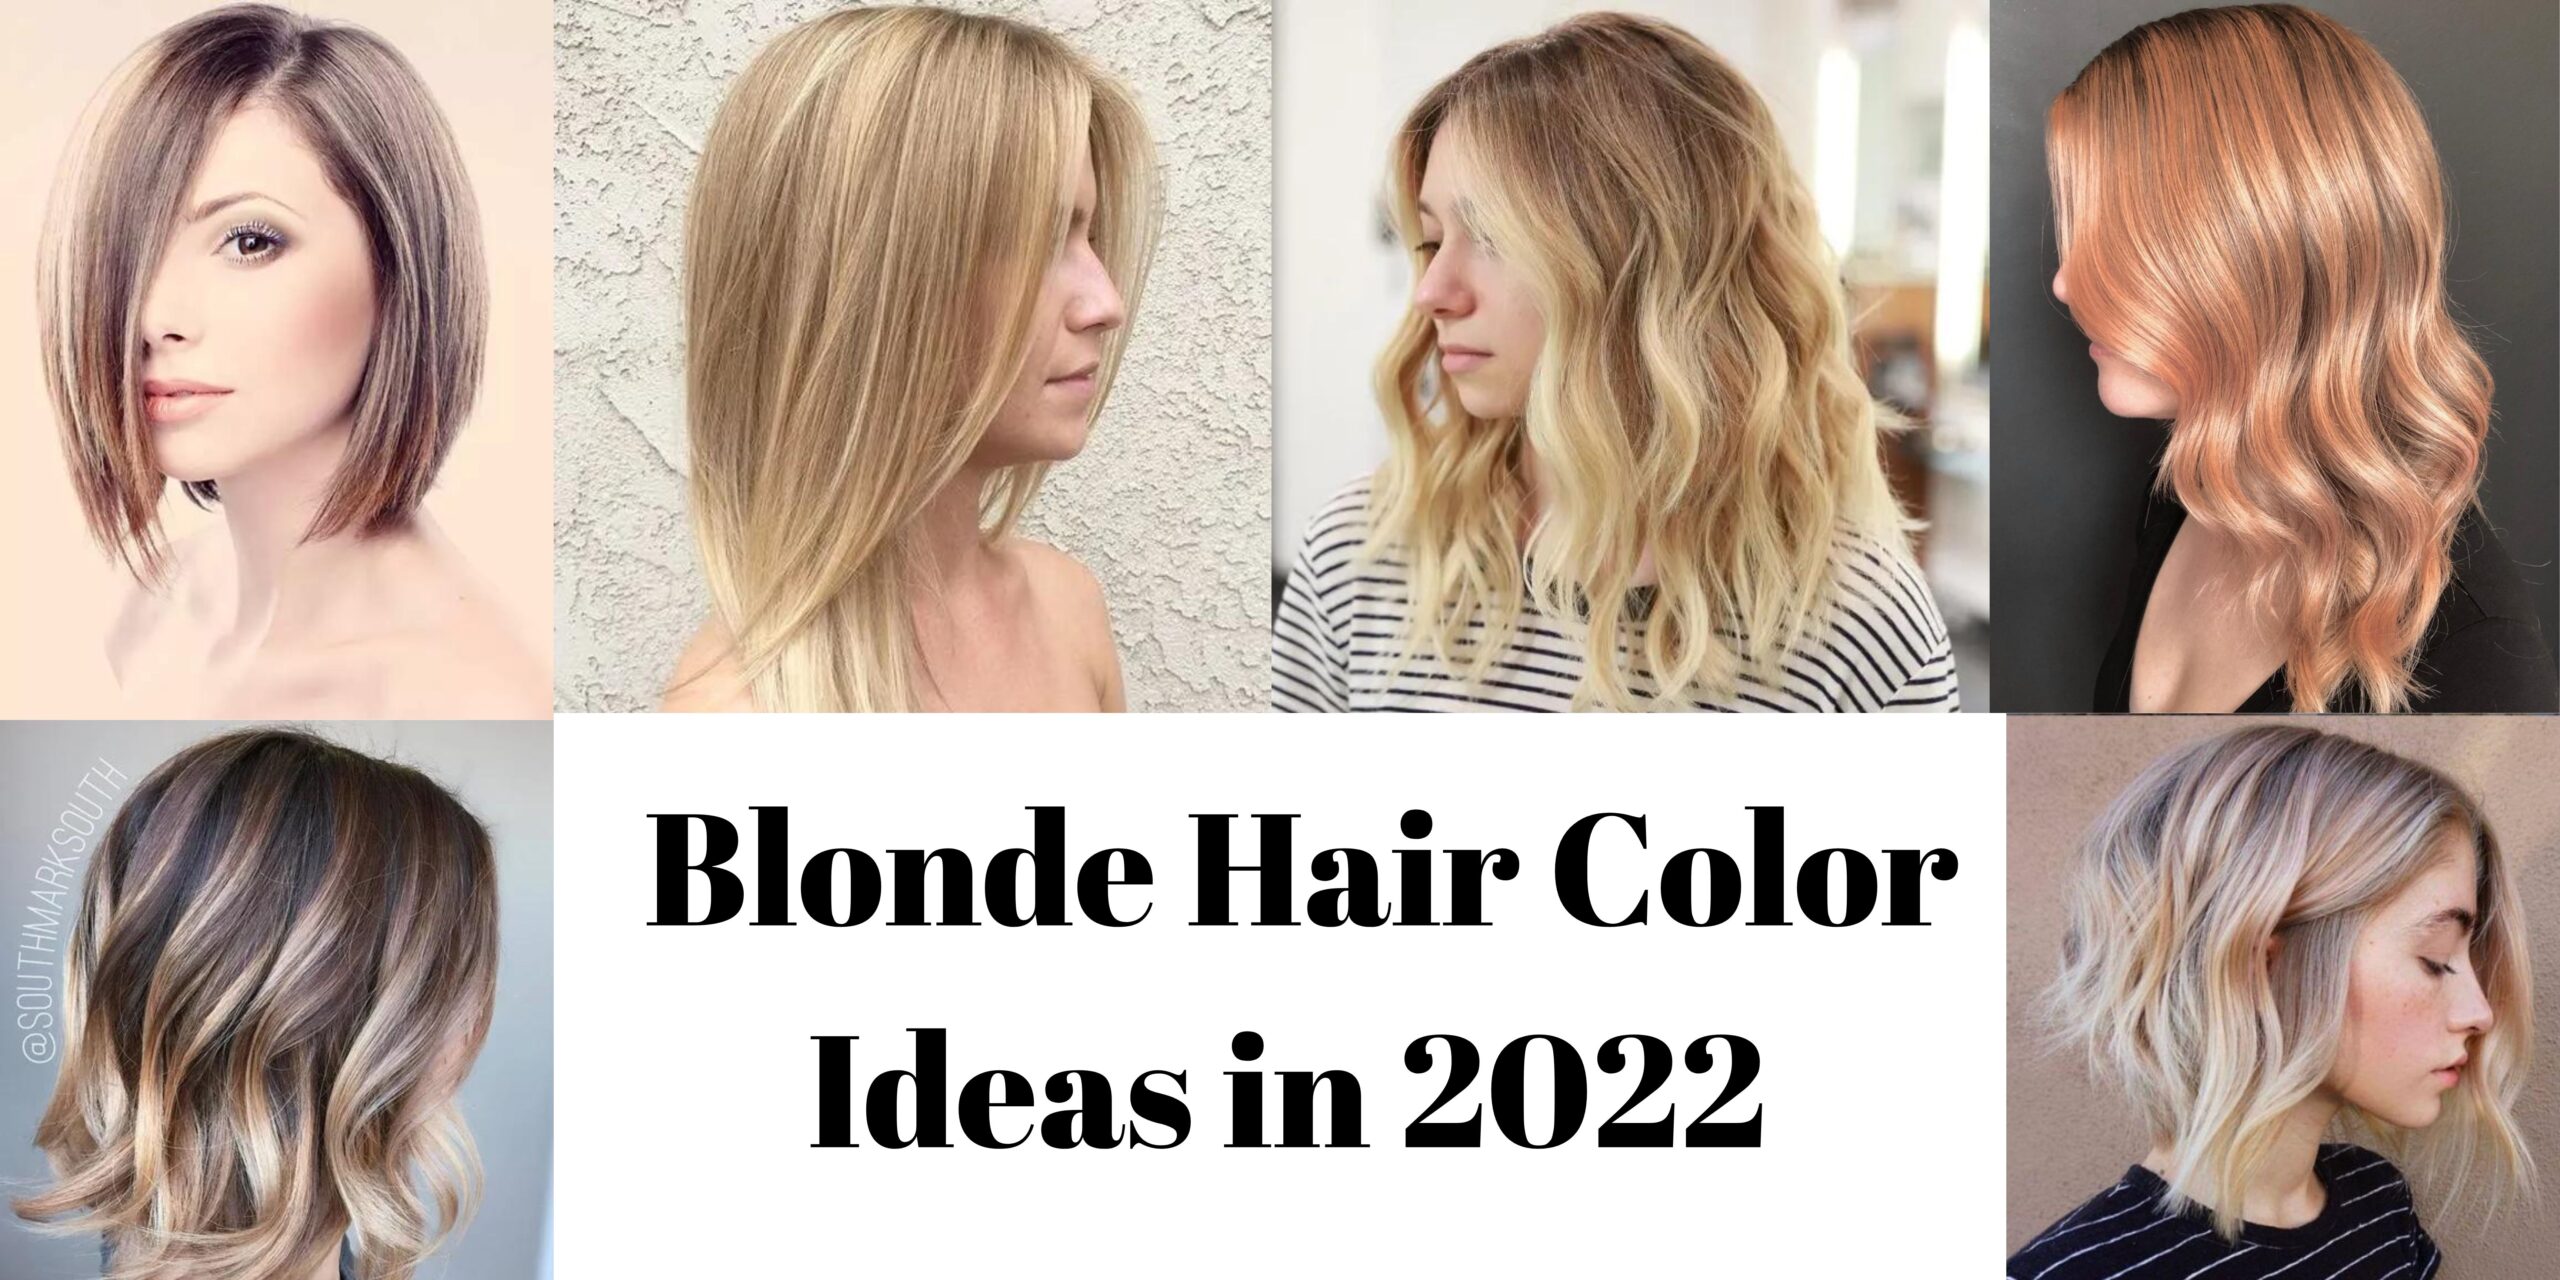 Blonde Hair Color Ideas in 2022